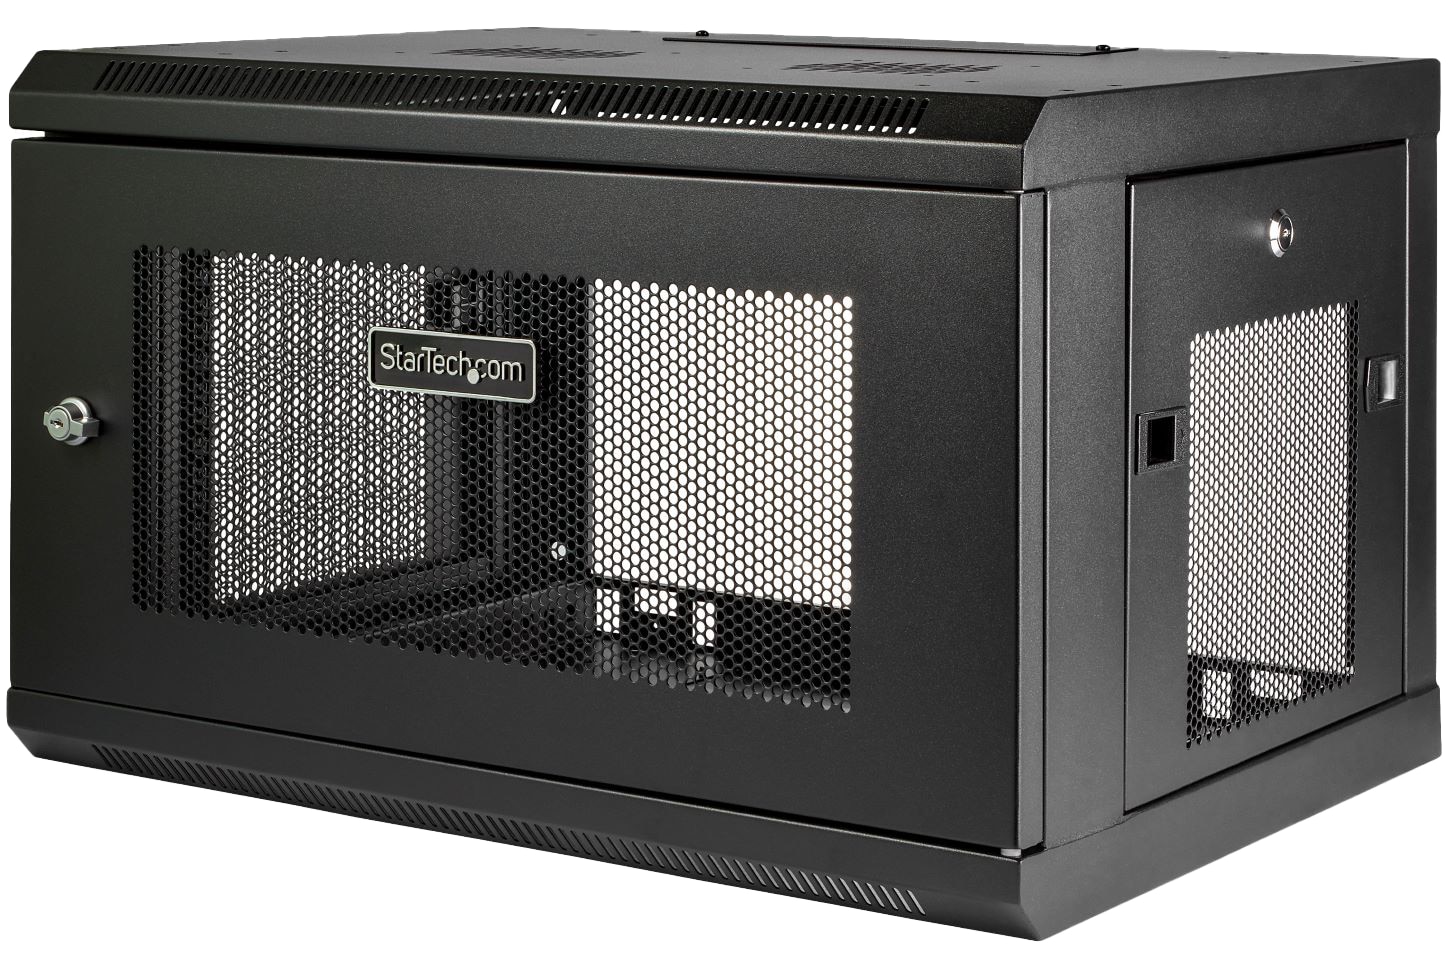 StarTech.com 2-Post 6U Wall Mount Network Cabinet, 19" Lockable Wall-Mounted Server Rack Enclosure for IT Equipment